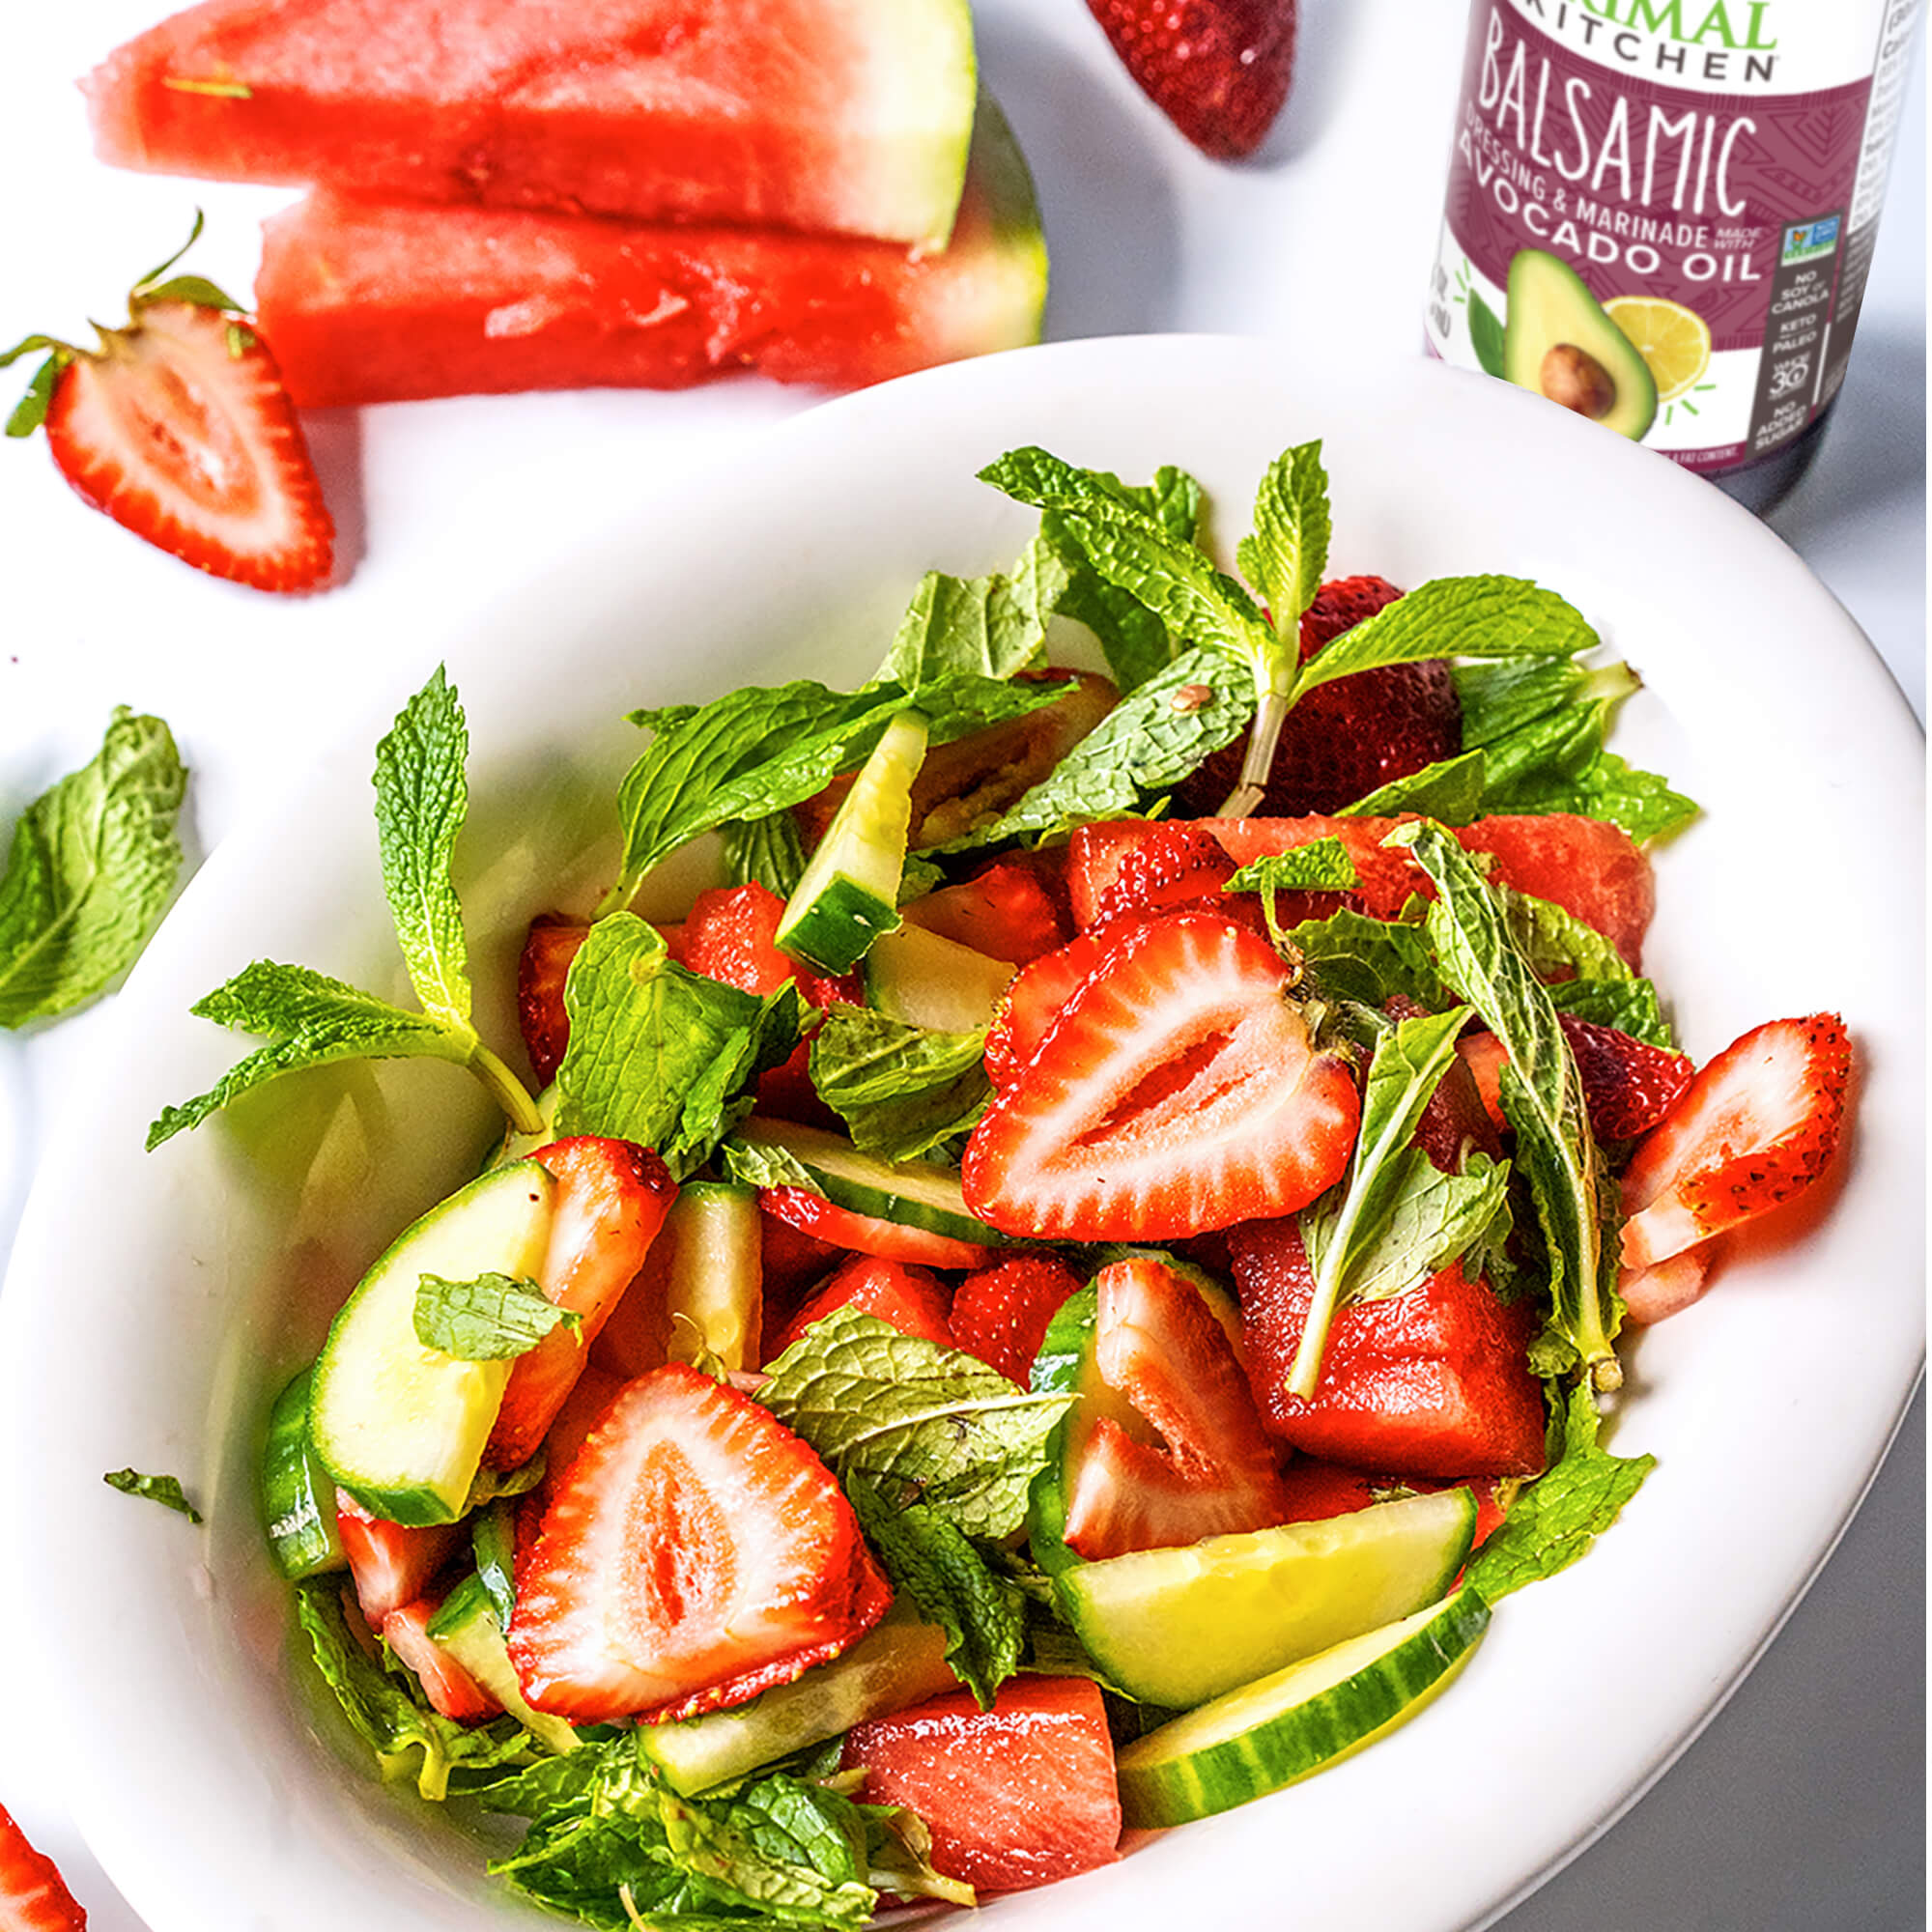 A mouthwatering cucumber mint and strawberry salad in a white dish, with watermelon slices and a bottle of Primal Kitchen Balsamic Dressing and Marinade in the background. 